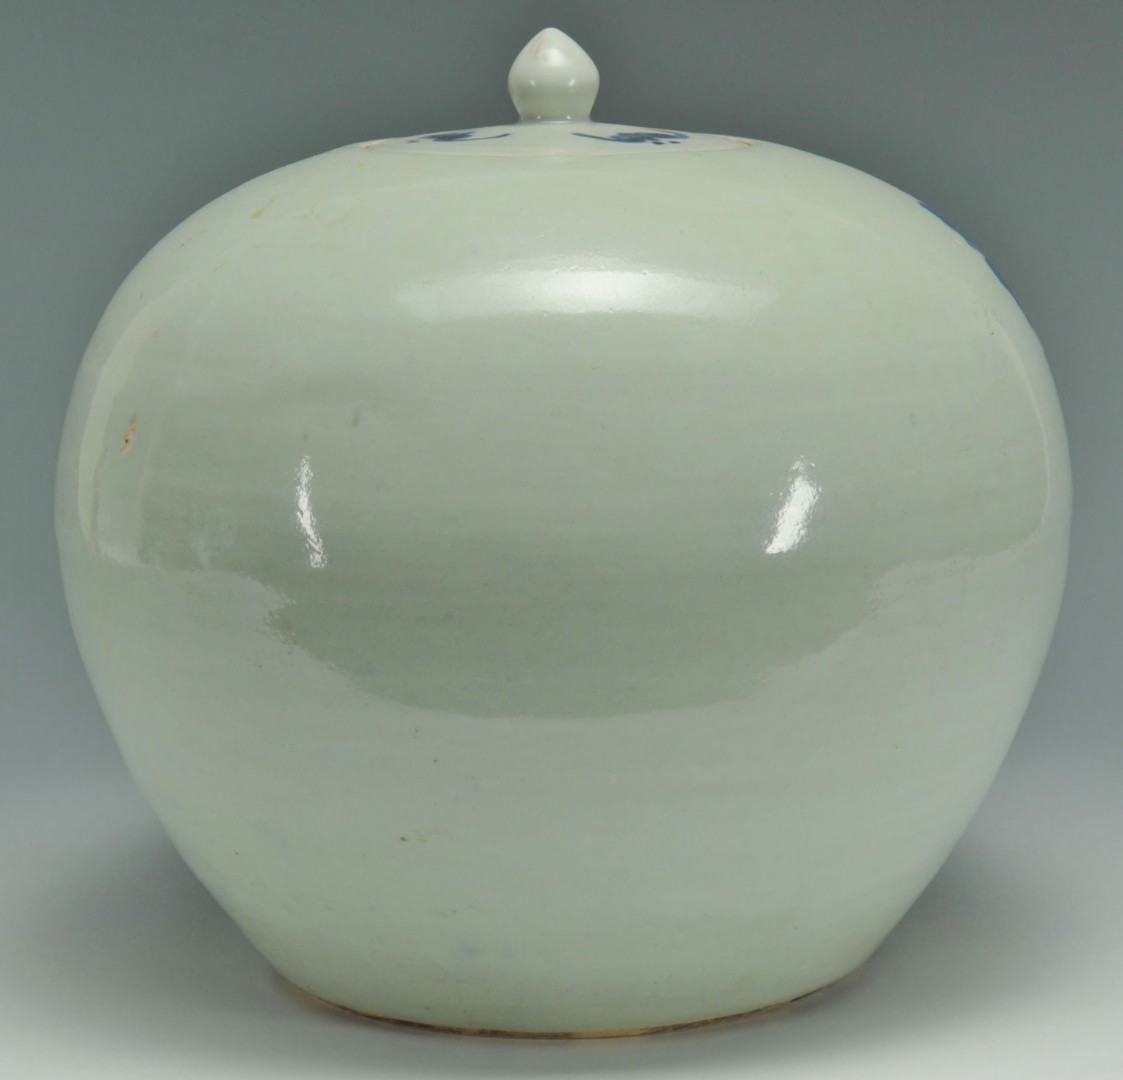 Lot 714: Chinese Blue And White Ginger Jar